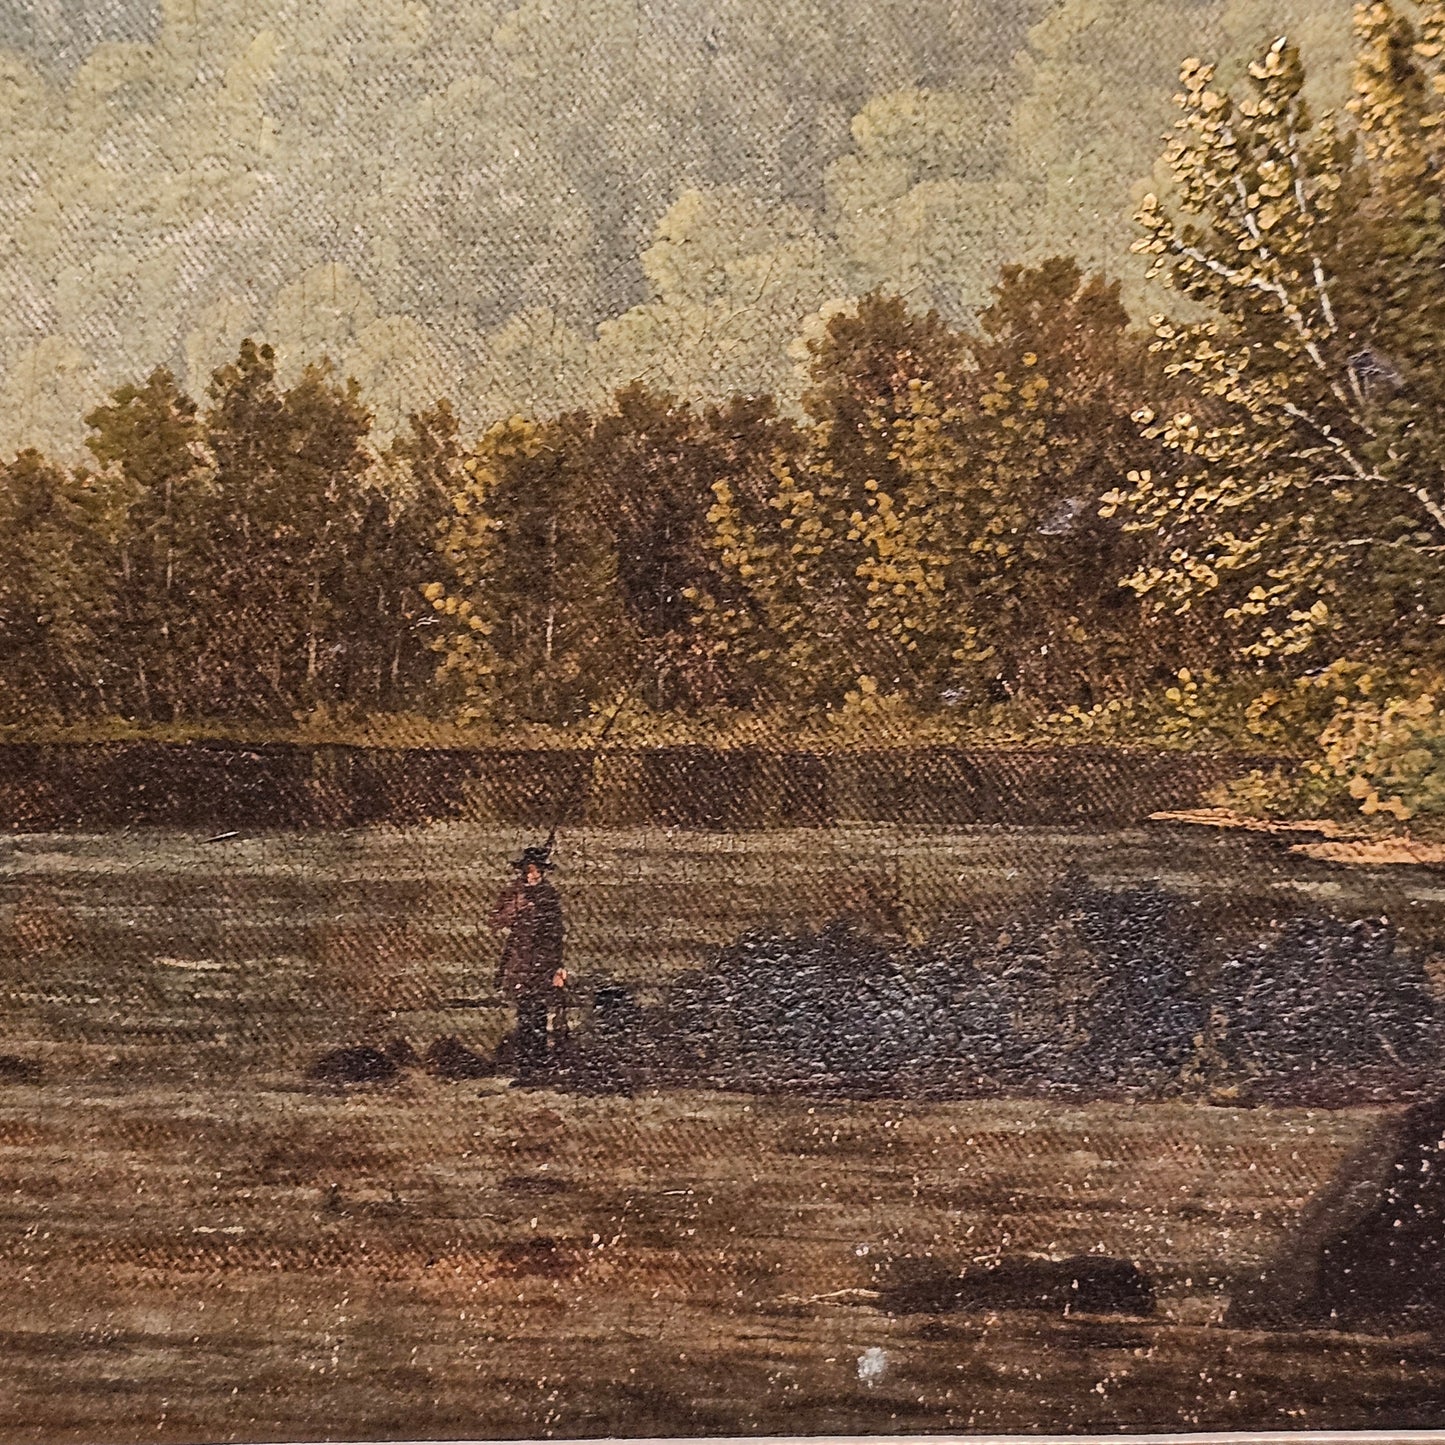 Antique Hudson River School Painting on Canvas of Men Fishing in River